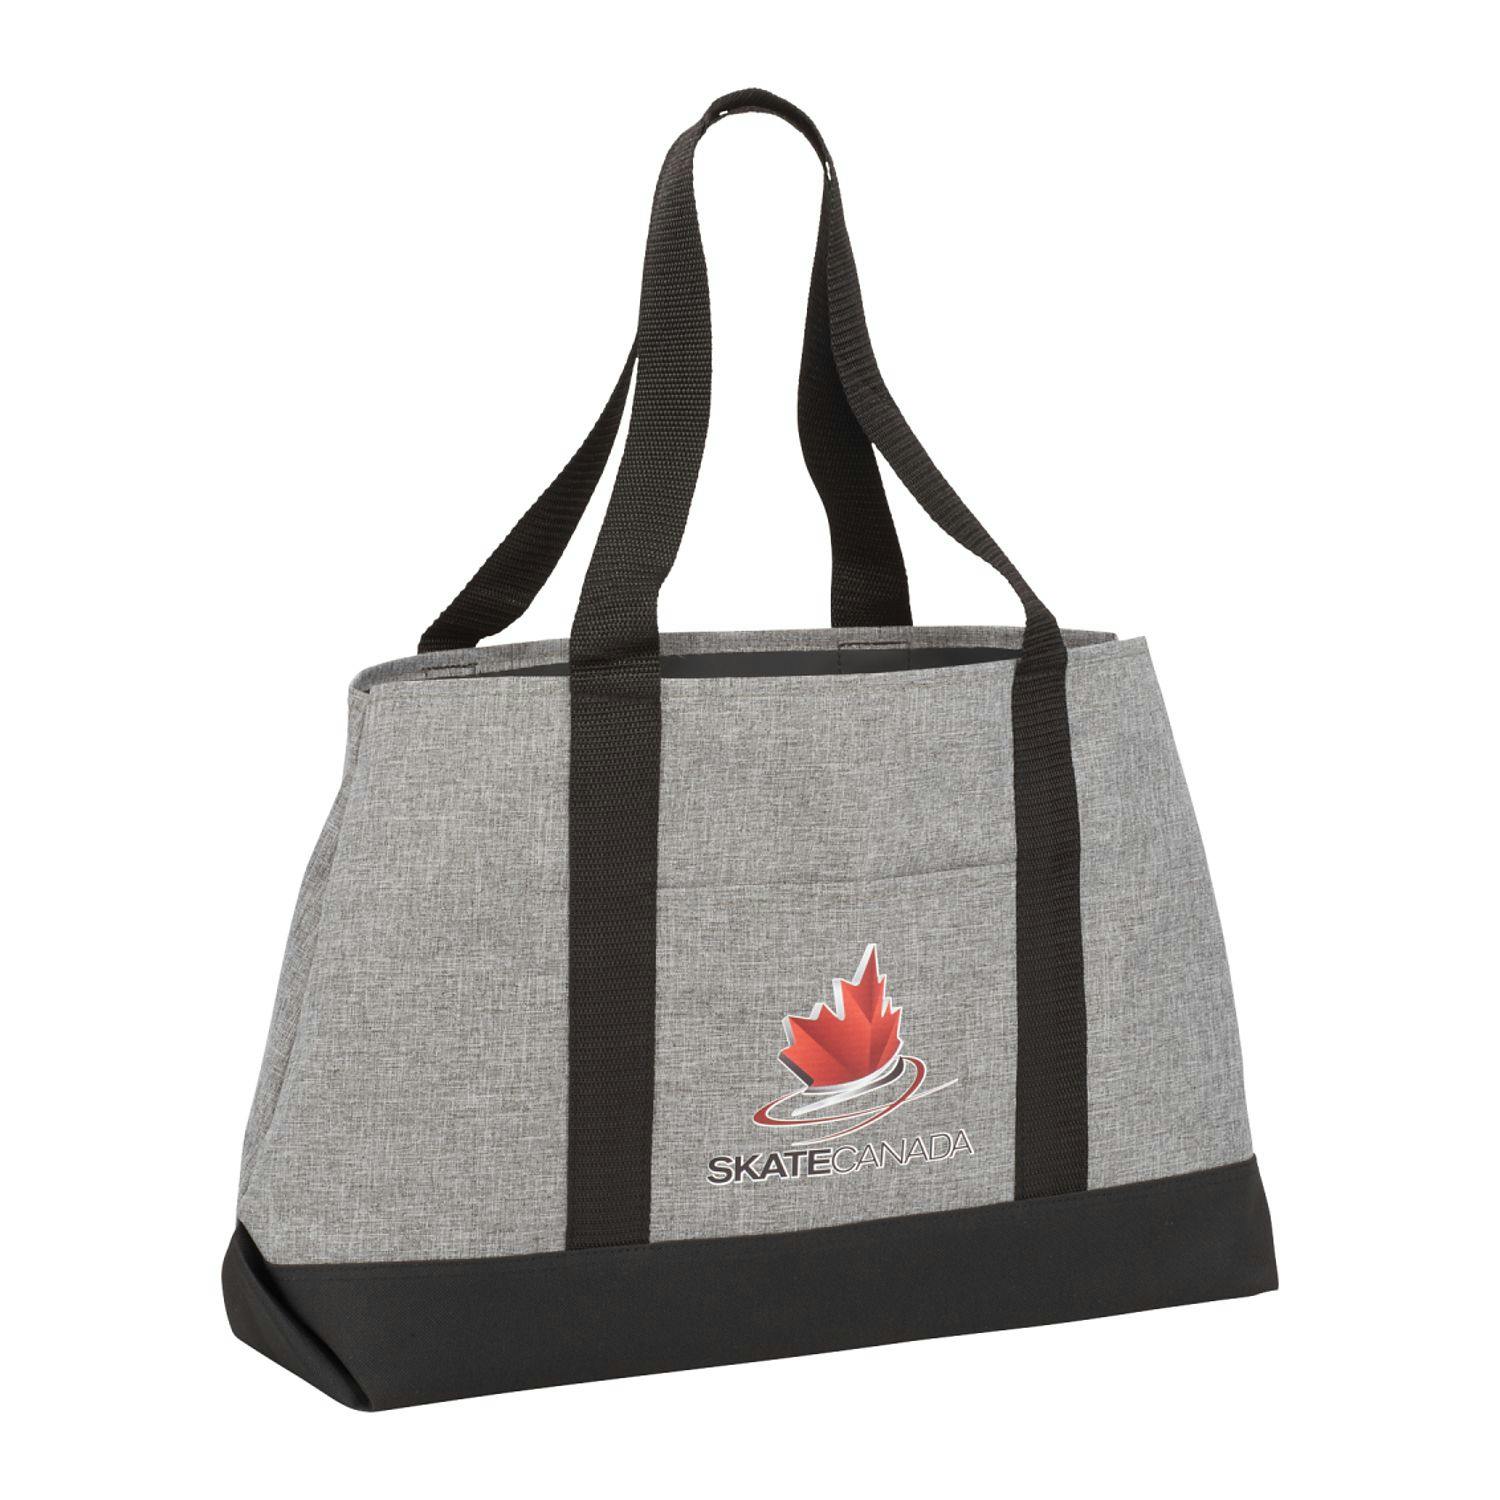 Excel Sport Leisure Boat Tote - additional Image 2